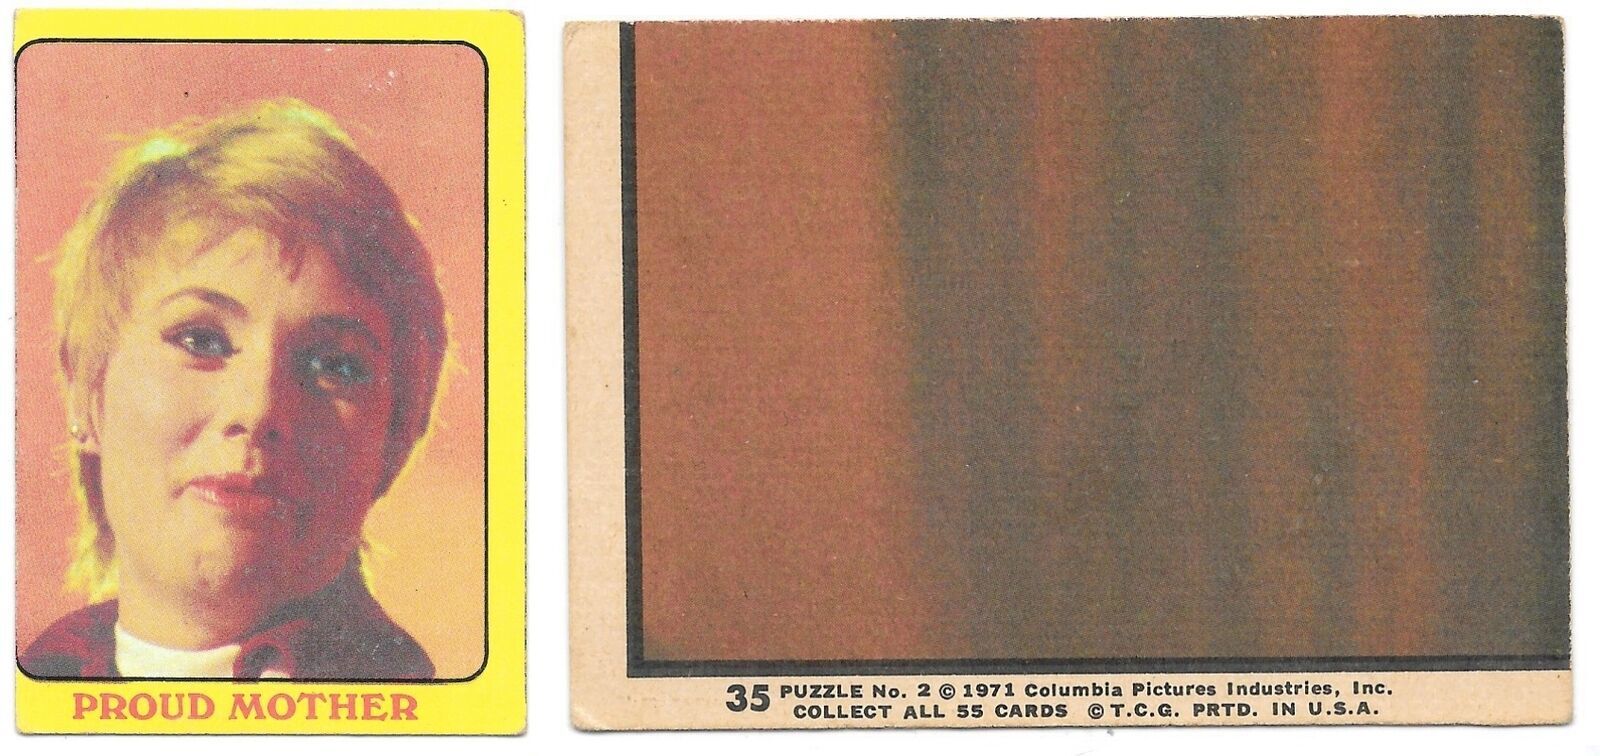 Primary image for The Partridge Family TV Series Trading Card Yellow #35 Topps 1971 U.S.A. Version